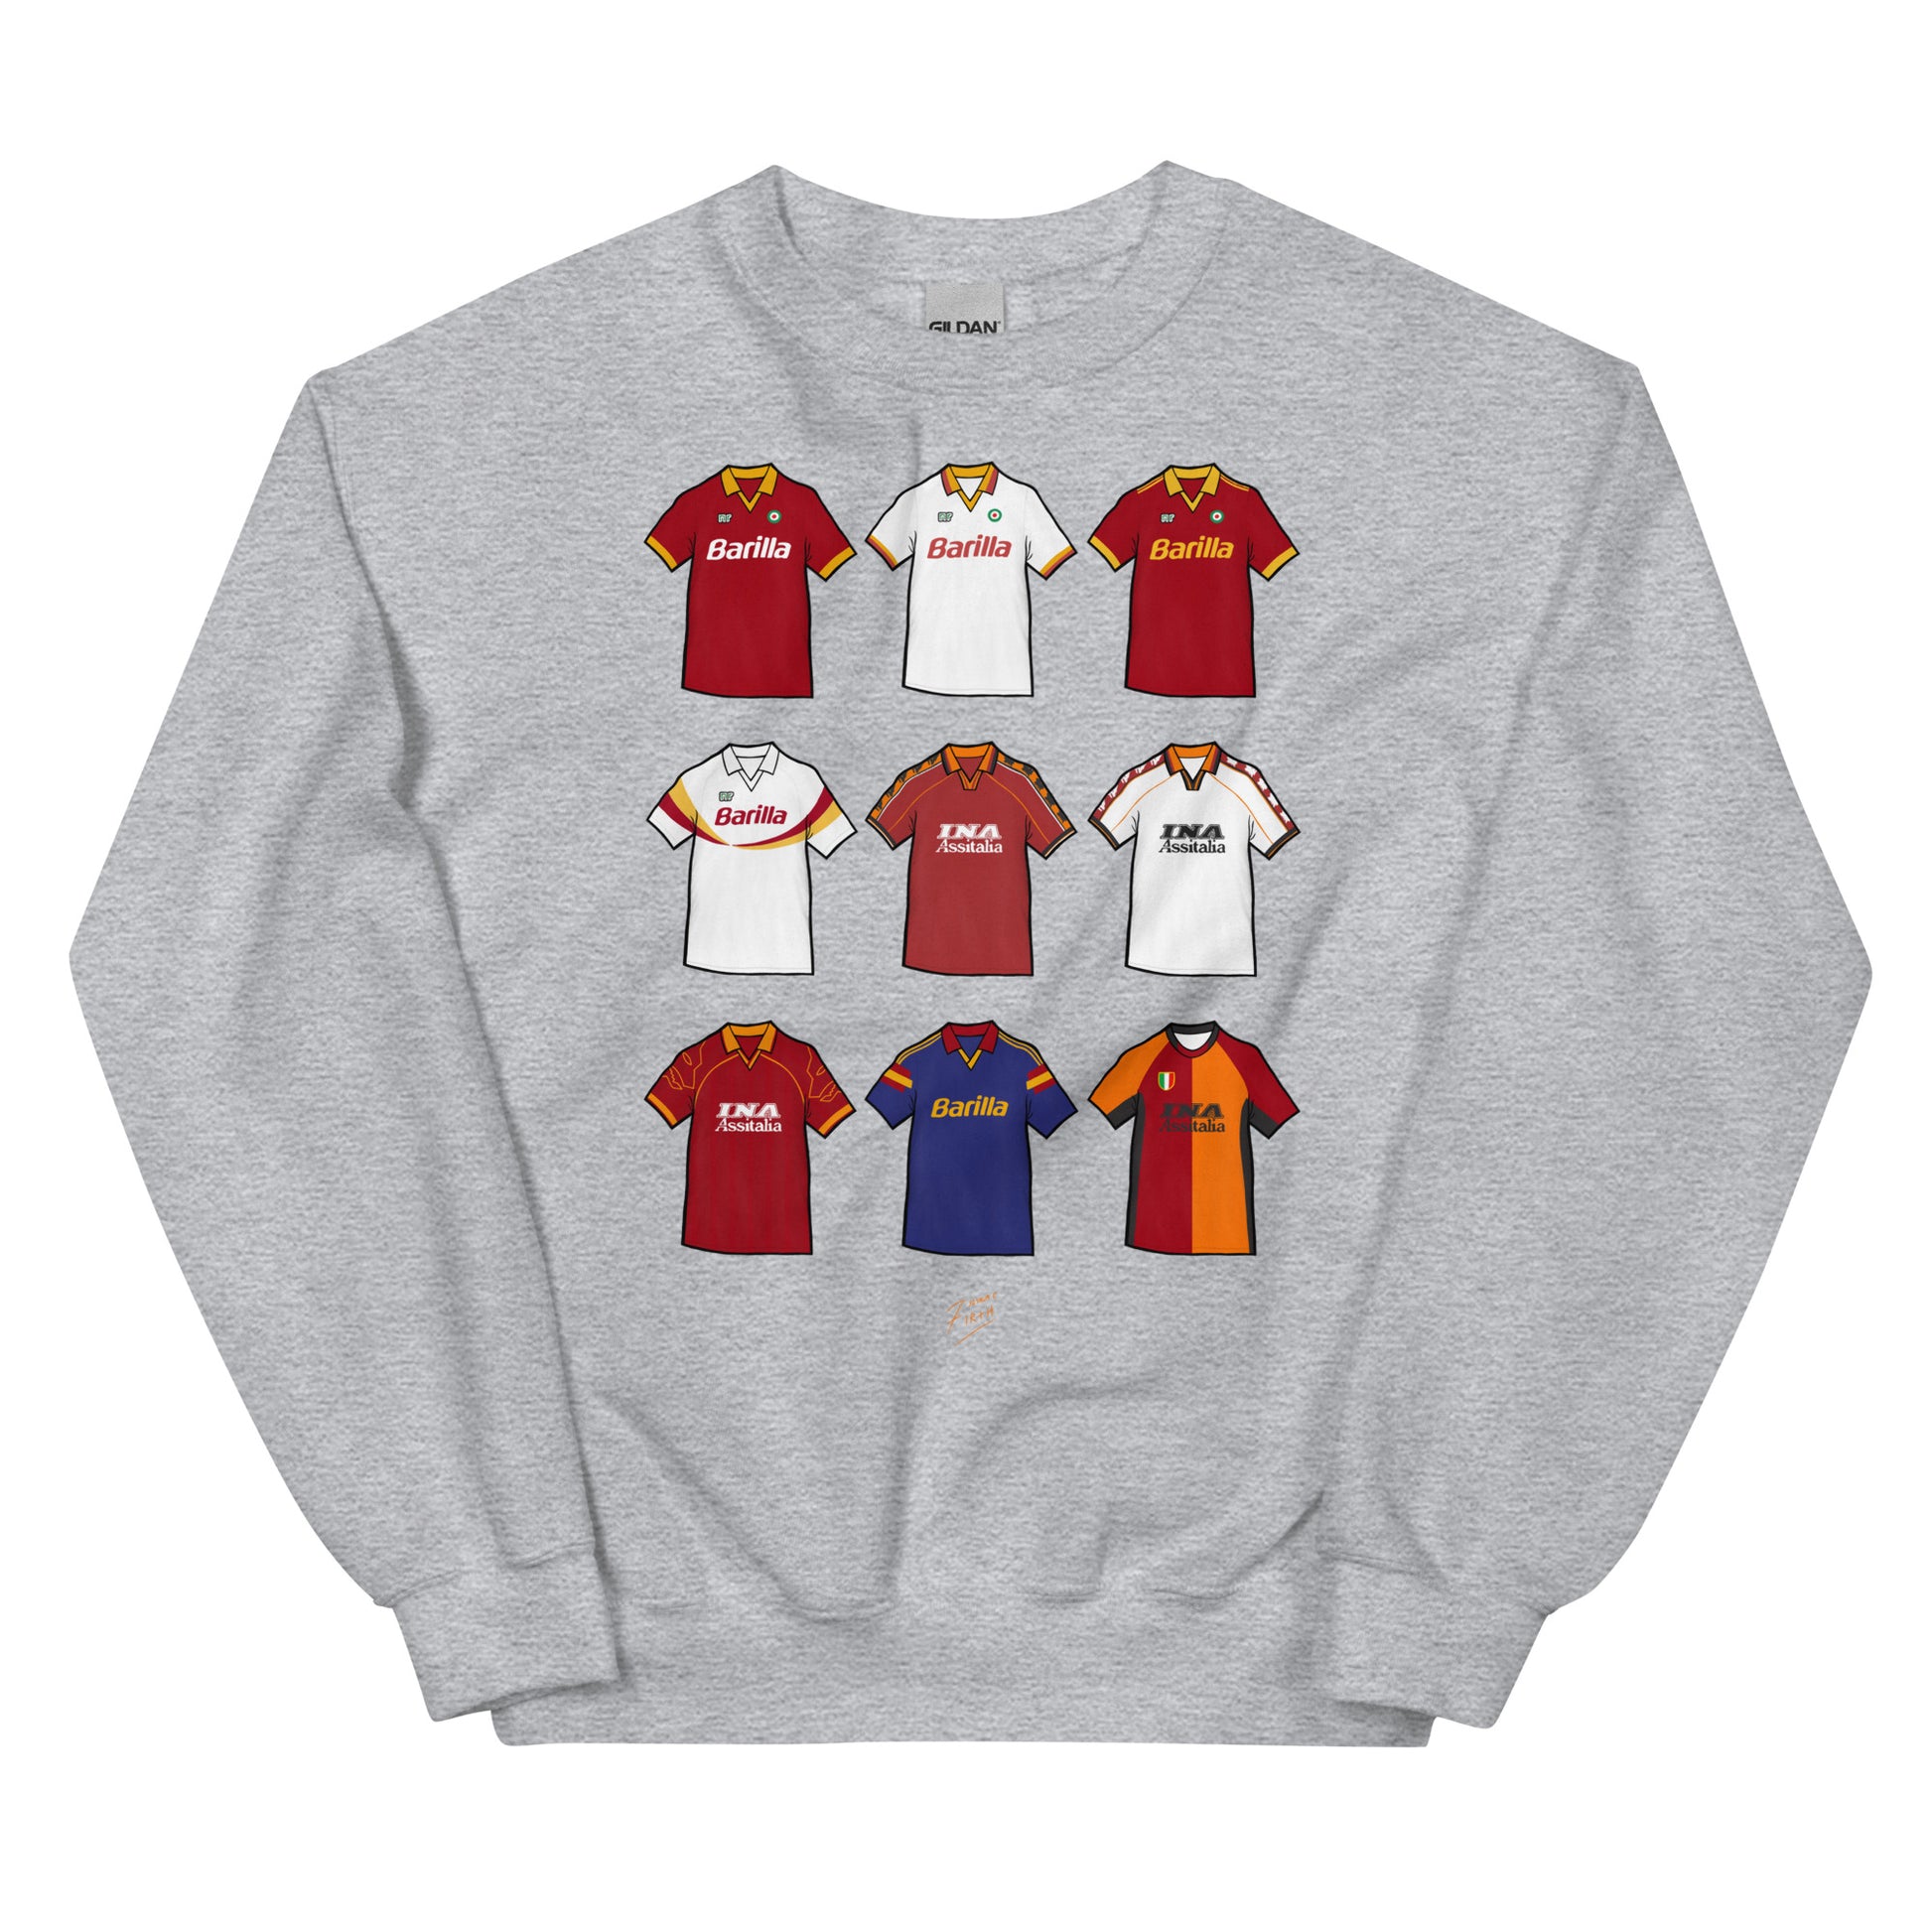 Transport yourself back to the glory days of AS Roma with this vintage-inspired artwork sweatshirt. Featuring iconic jerseys and colours, this unique piece is a must-have for any fan of the legendary Italian football club